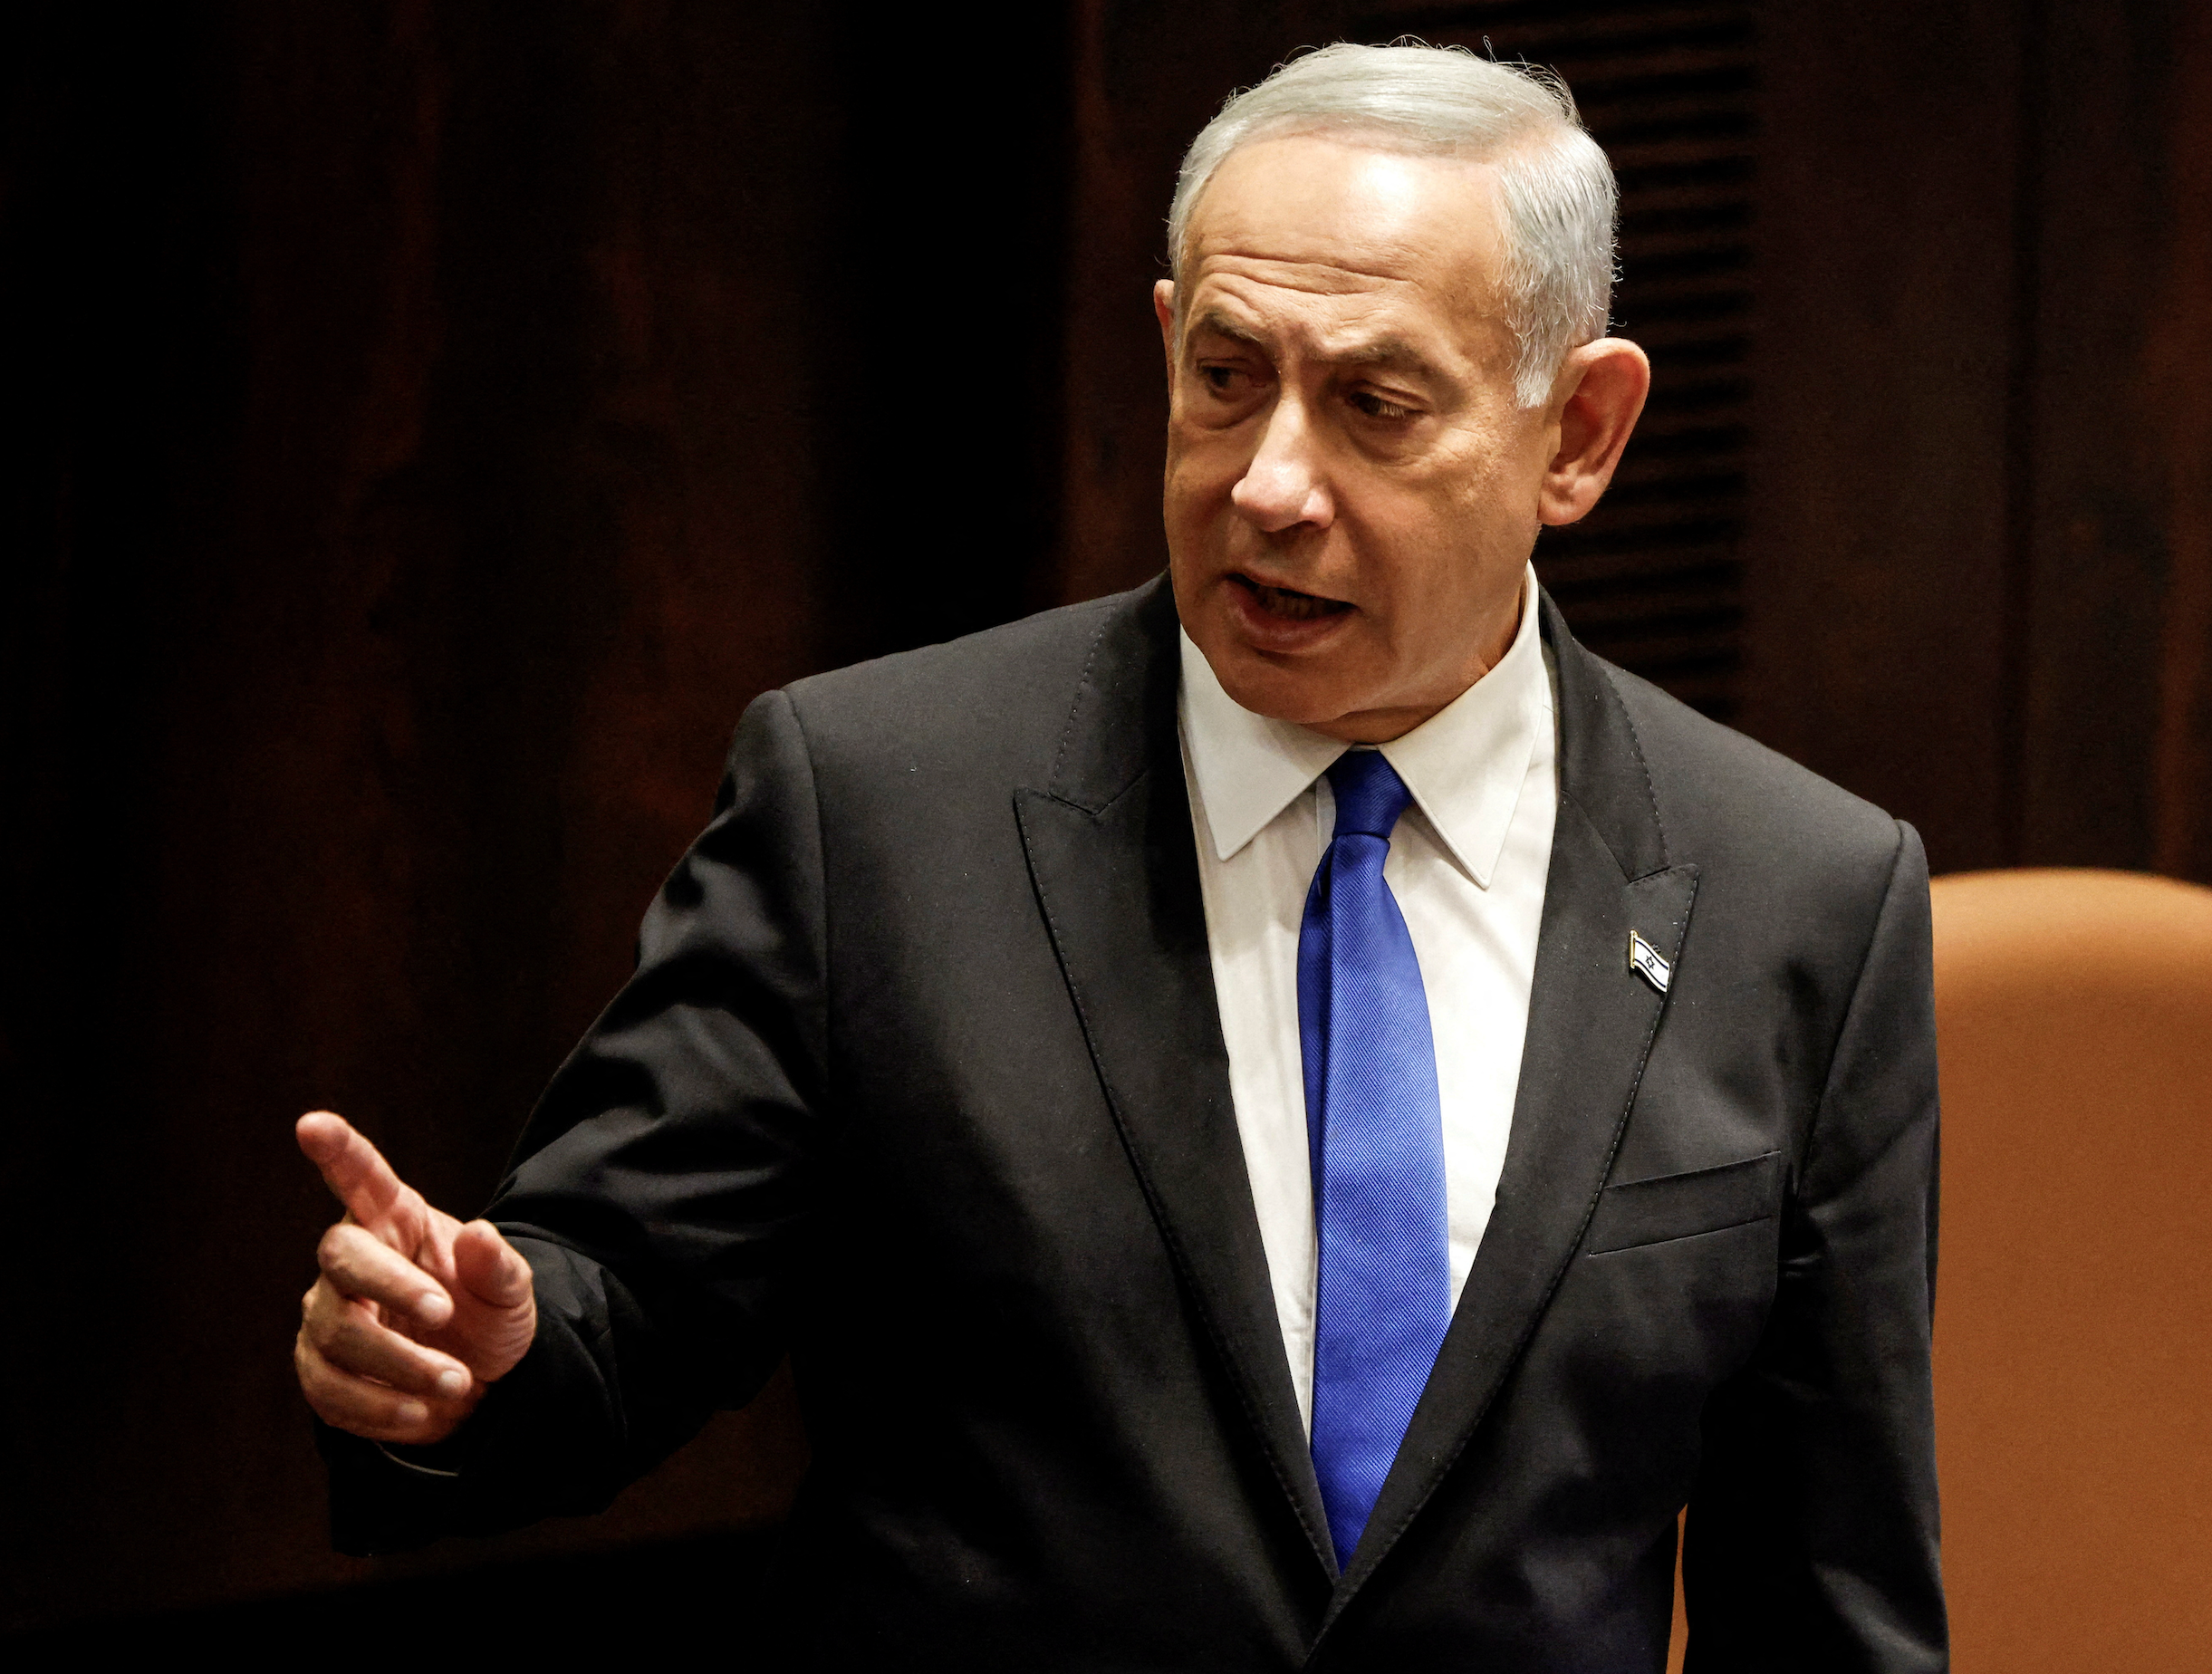 Netanyahu coalition under strain after US abstains to allow Gaza ceasefire vote